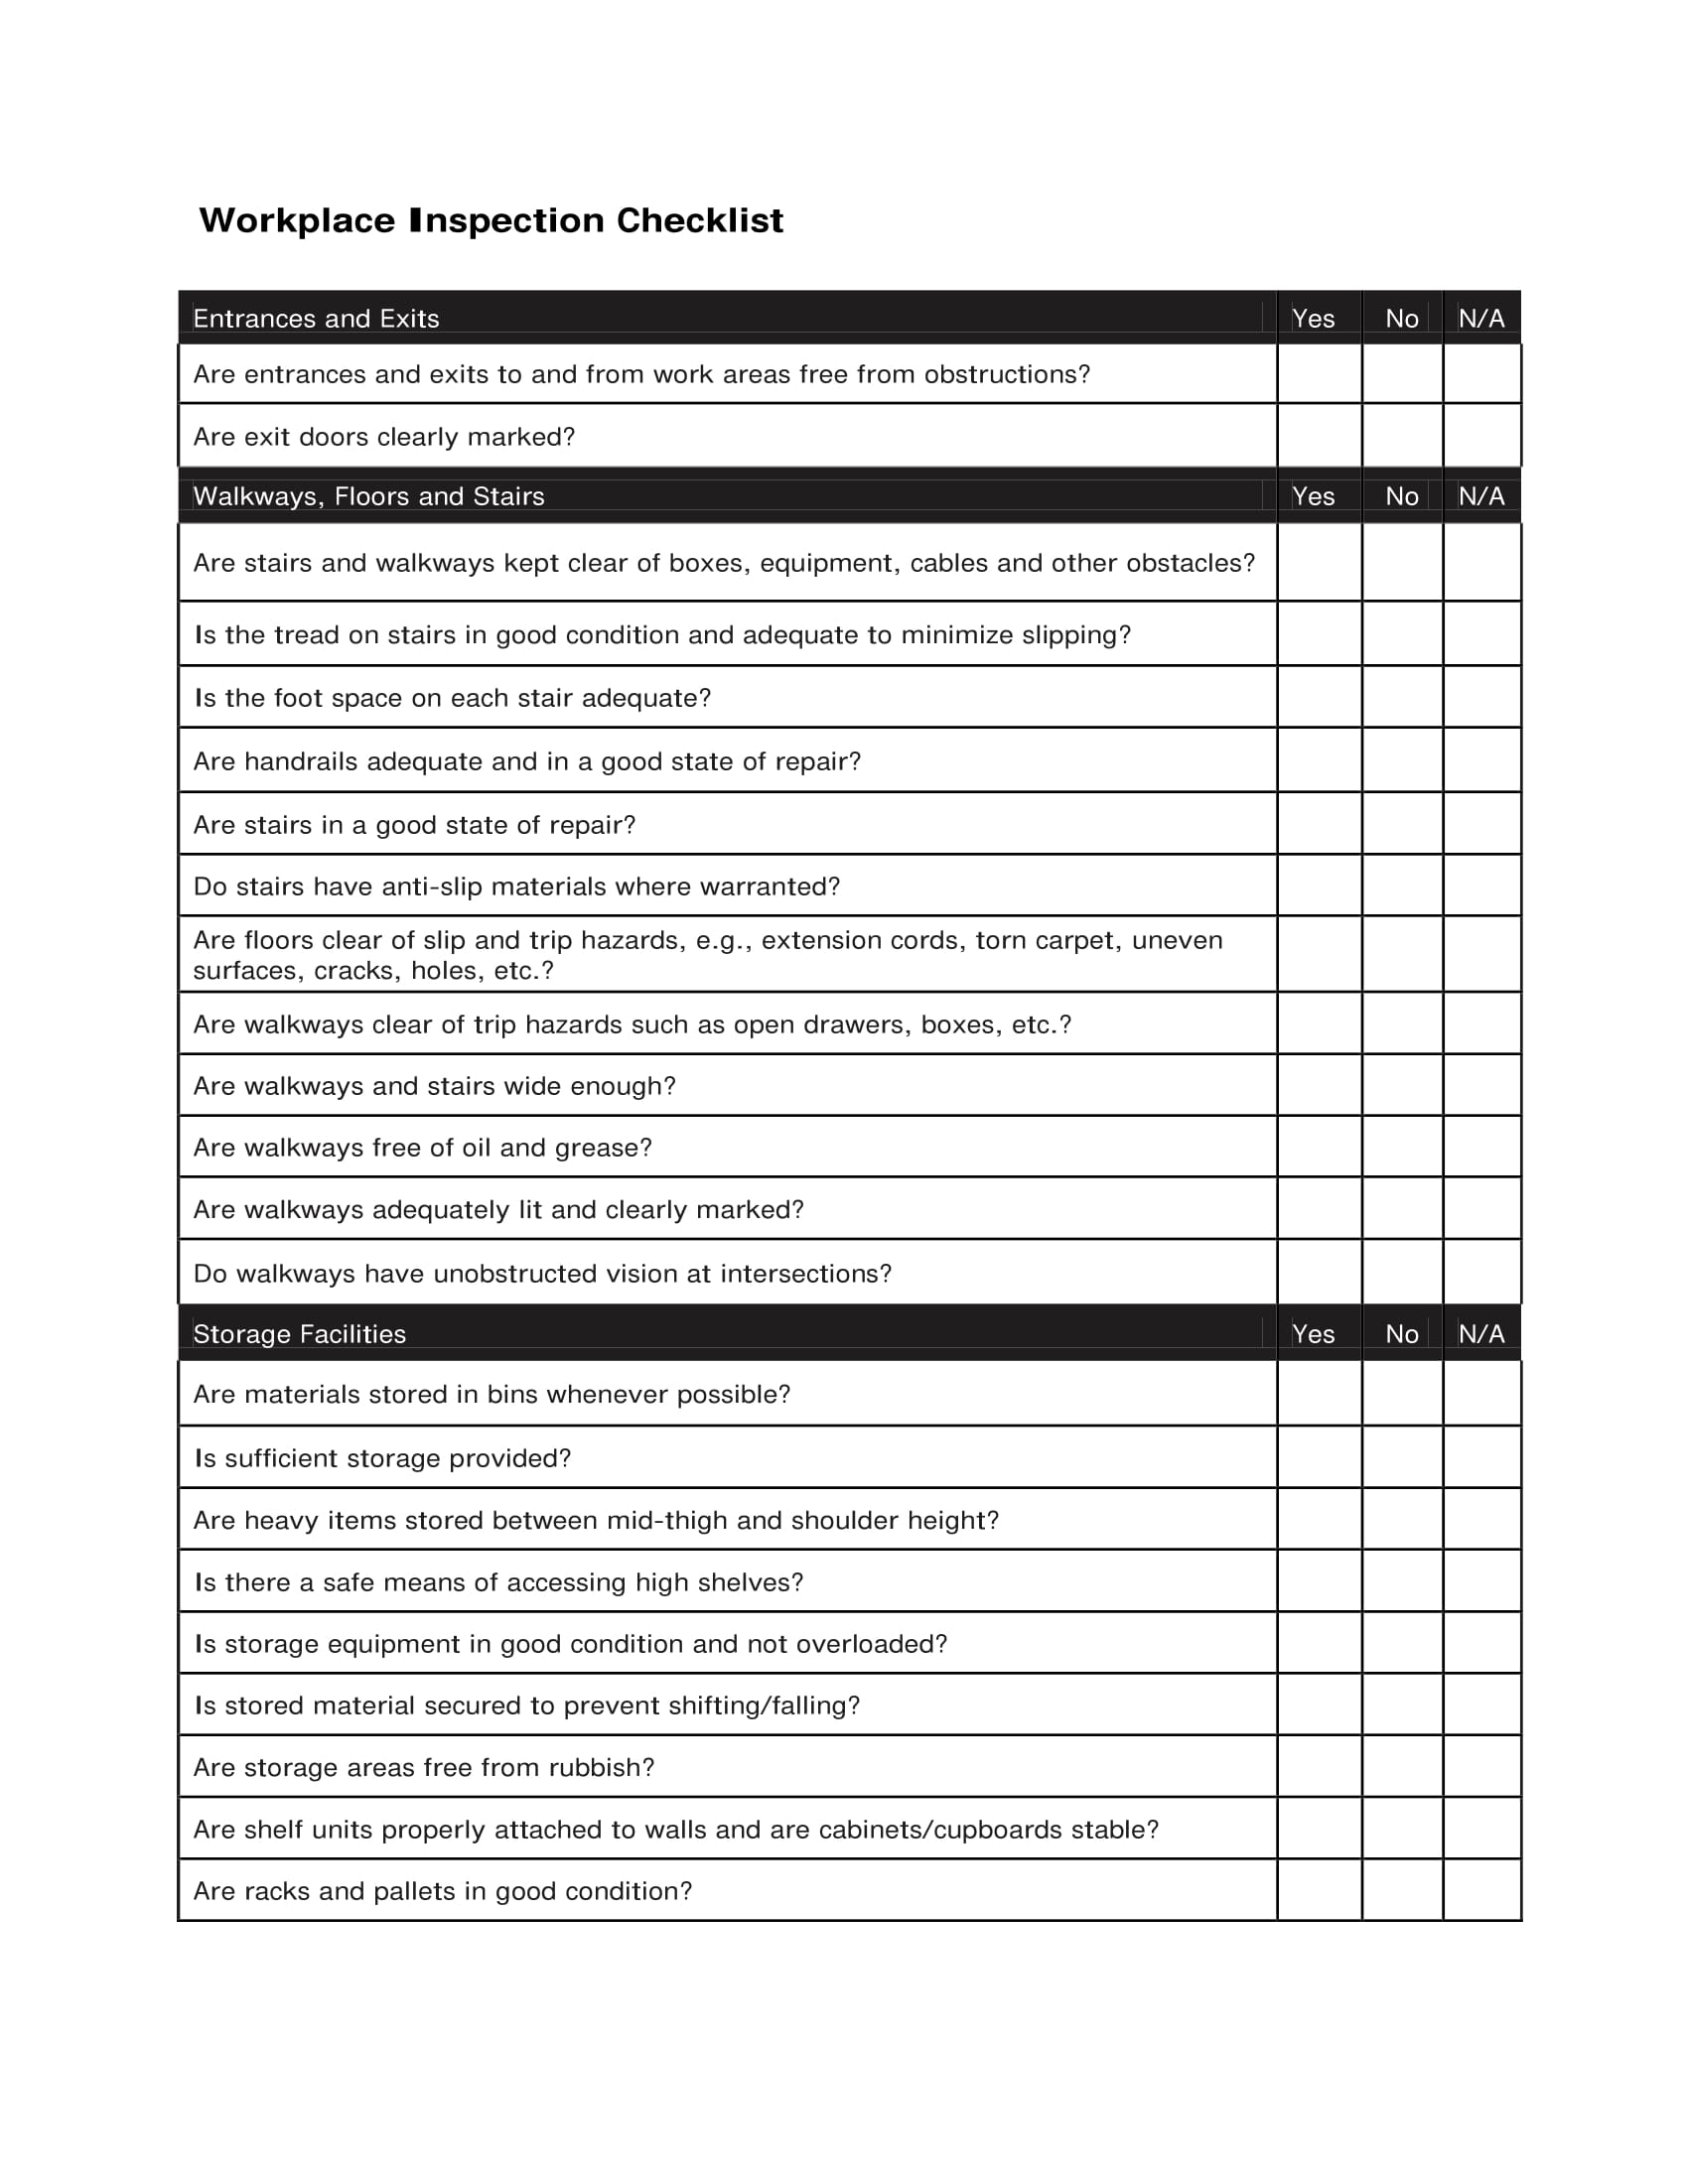 Workplace Inspection Checklist Template Master of Documents